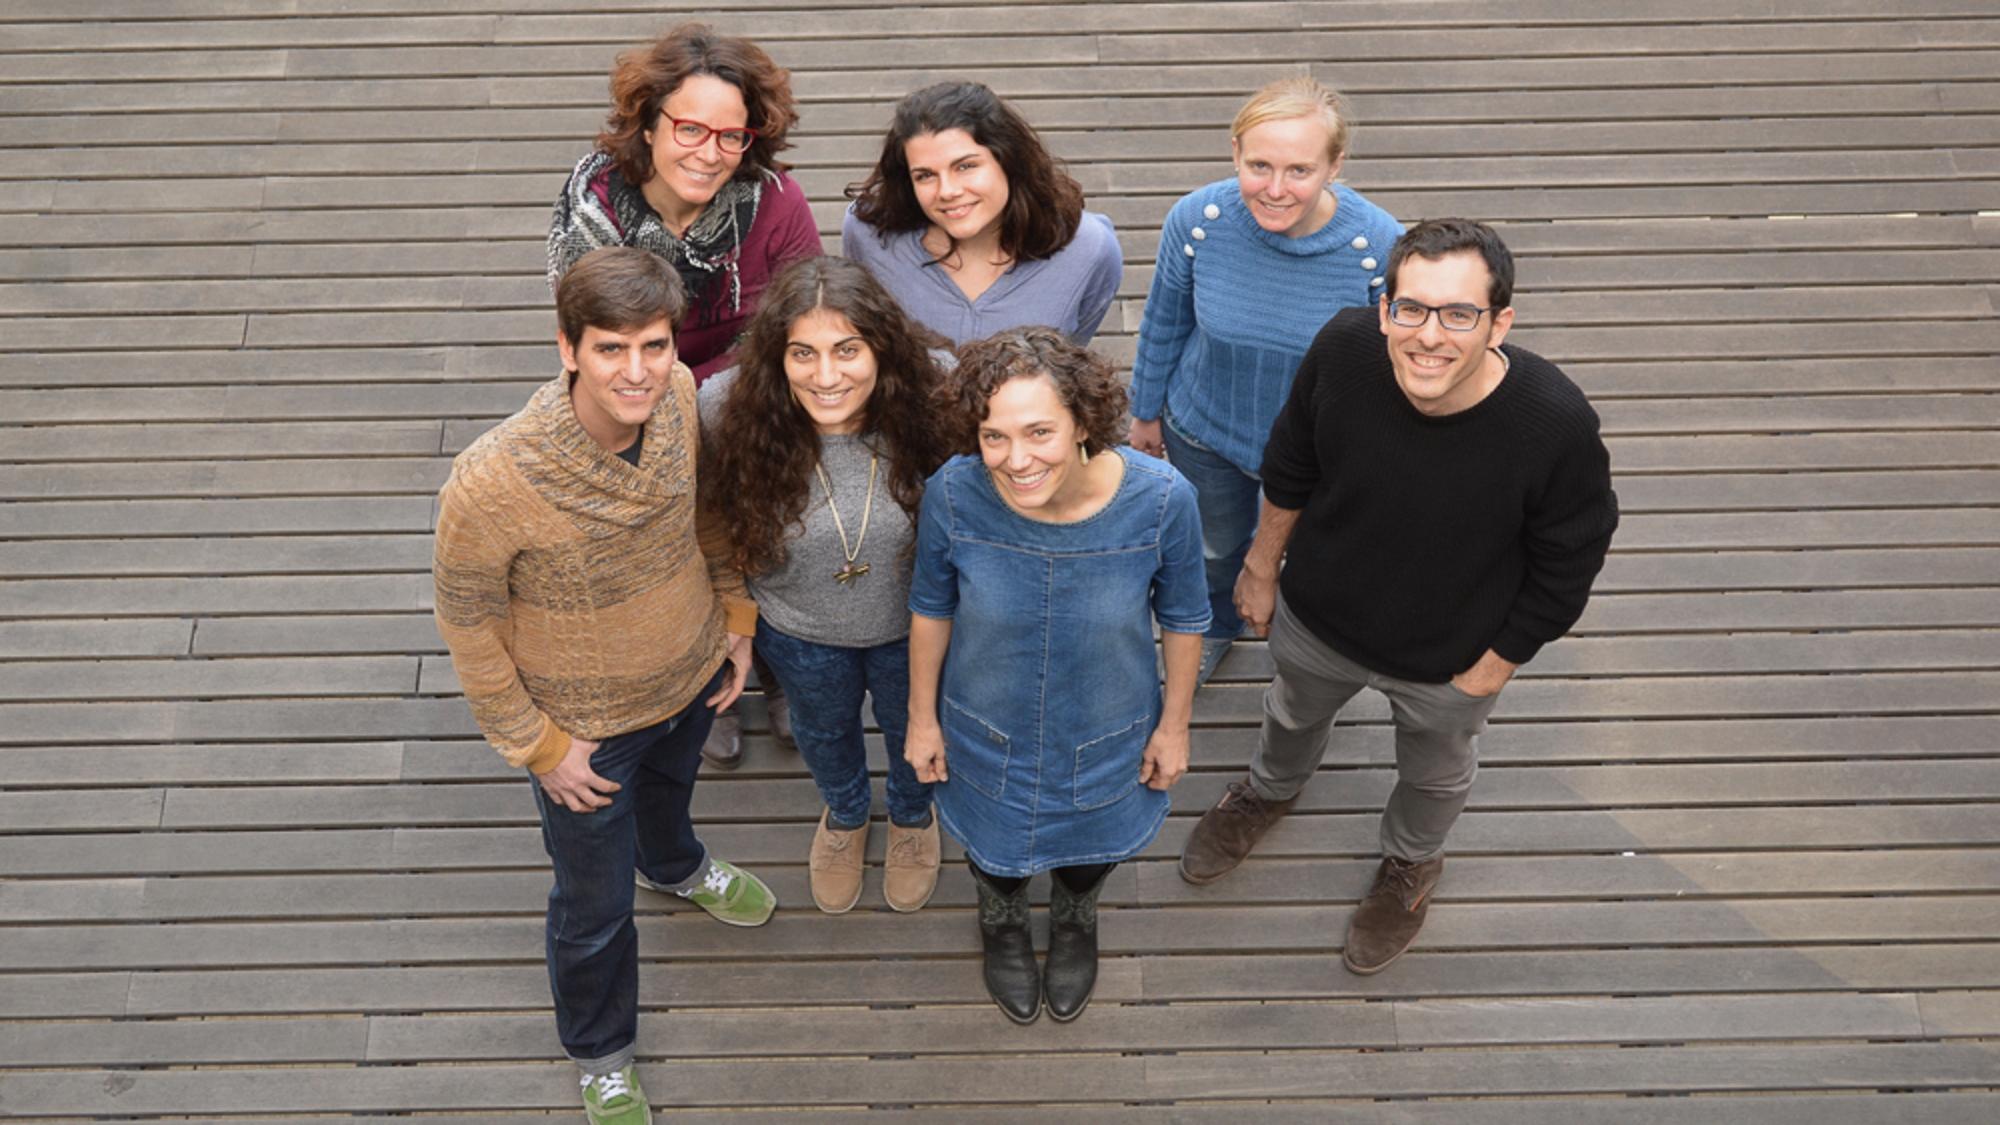 The team is formed by Cathryn Tonne, Mar Alvarez, Albert Ambros, Maëlle Salmon, Margaux Sanchez, Ariadna Curto and Carles Milà.